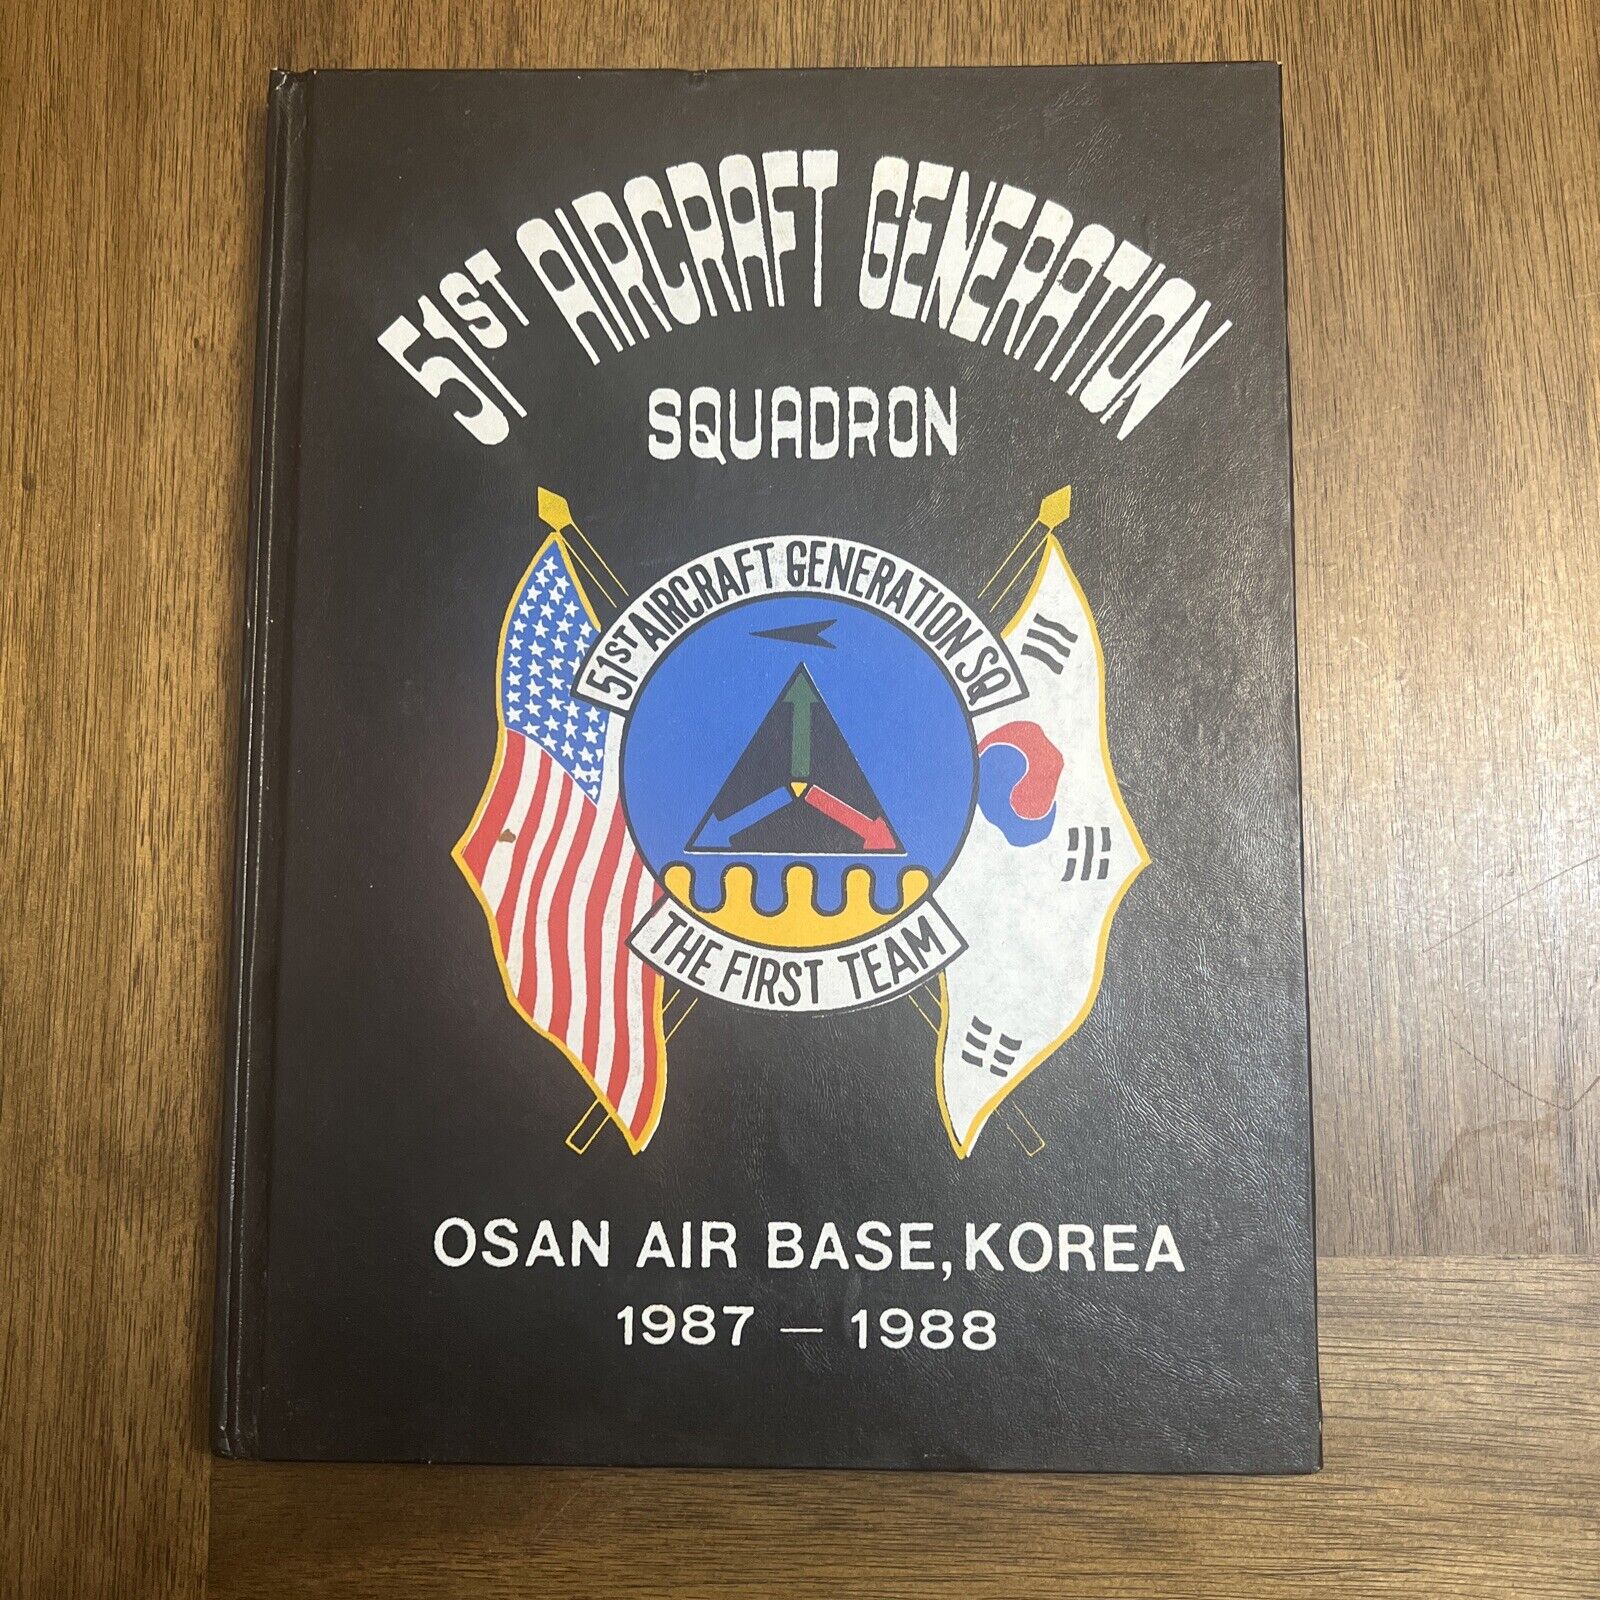 51st Aircraft Generation Squadron The First Team Osan Air Base 1987-1988 Sk17